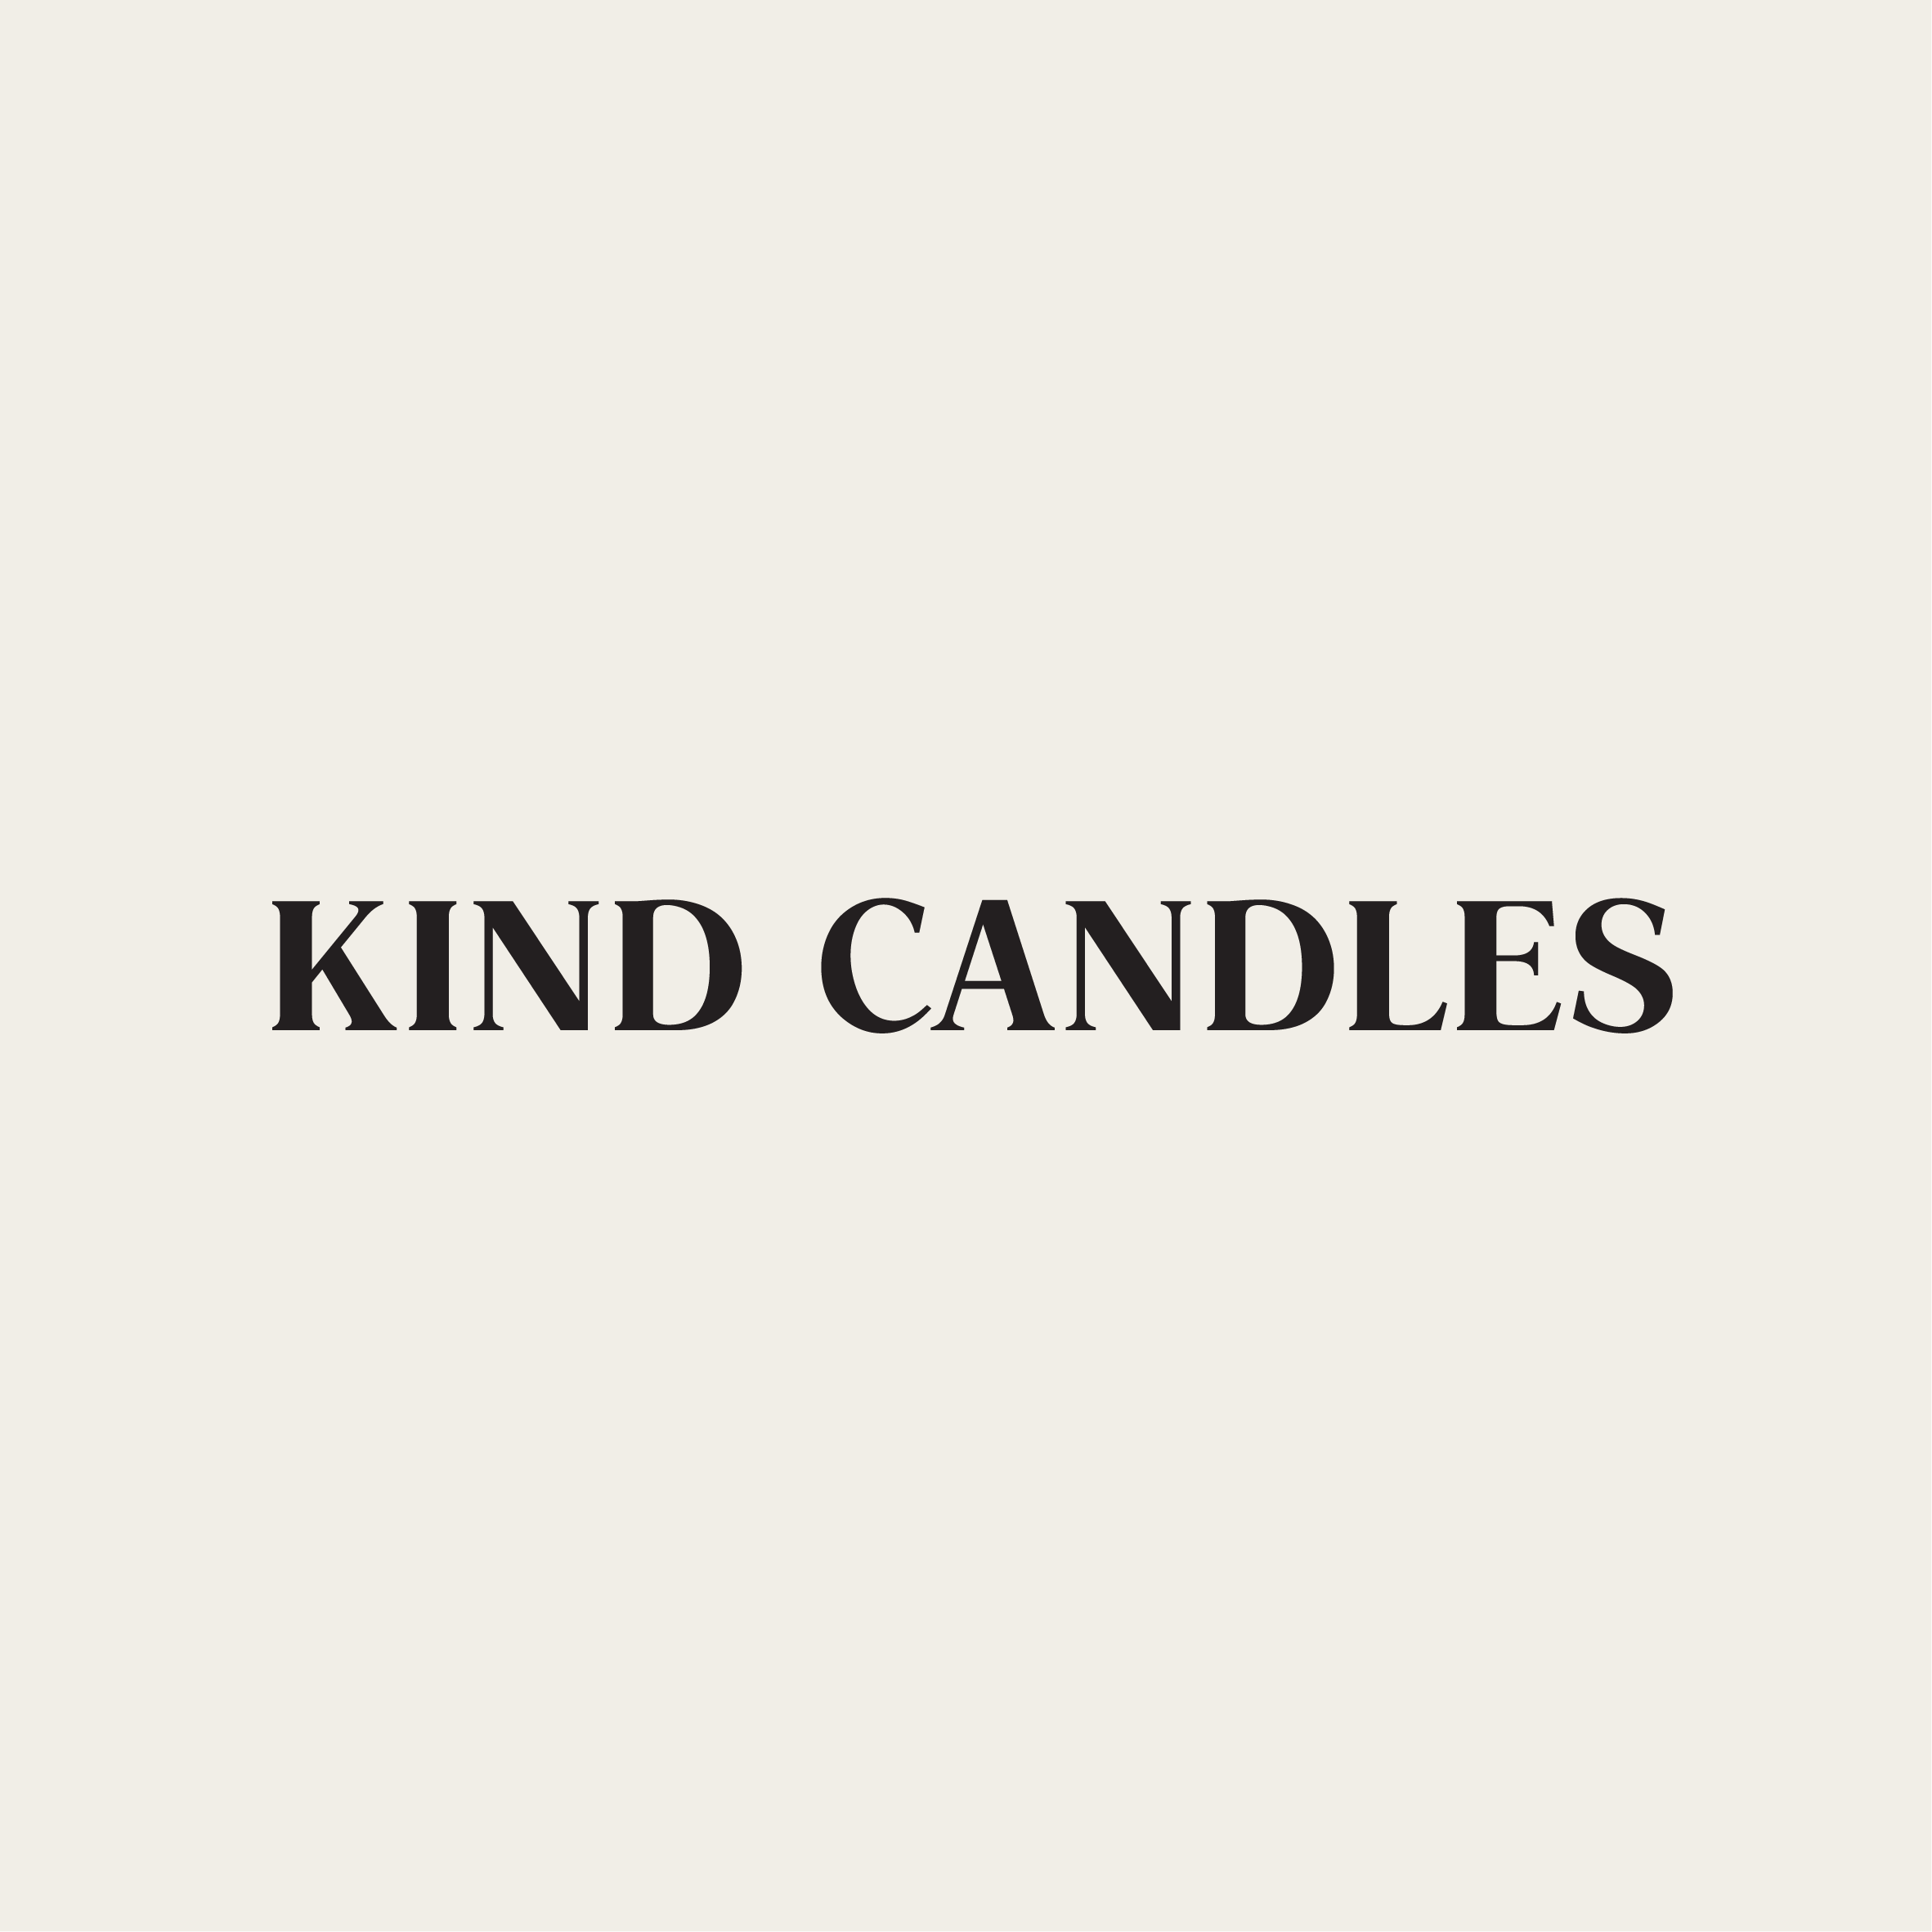 KIND CANDLES